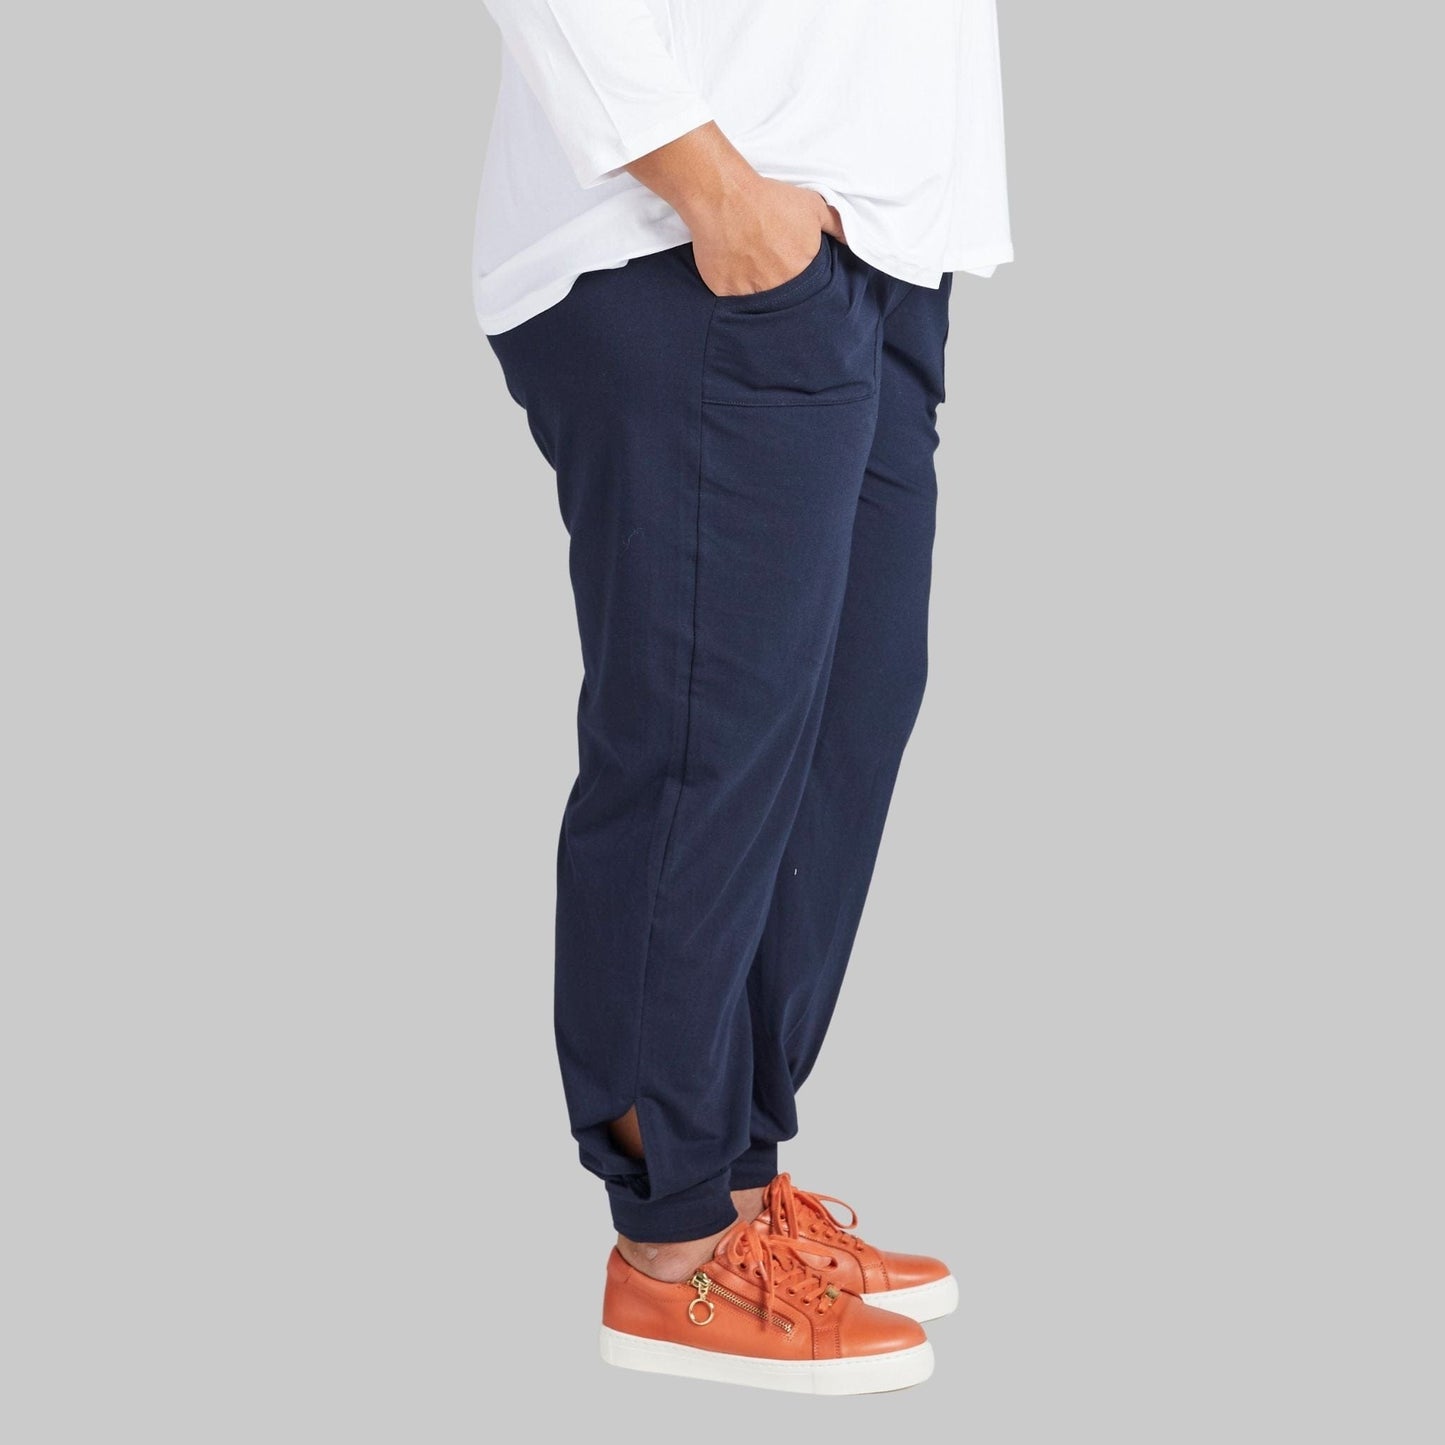 CST Women's Tapered Track Pants with Adjustable Cuff - Navy - Caring Clothing